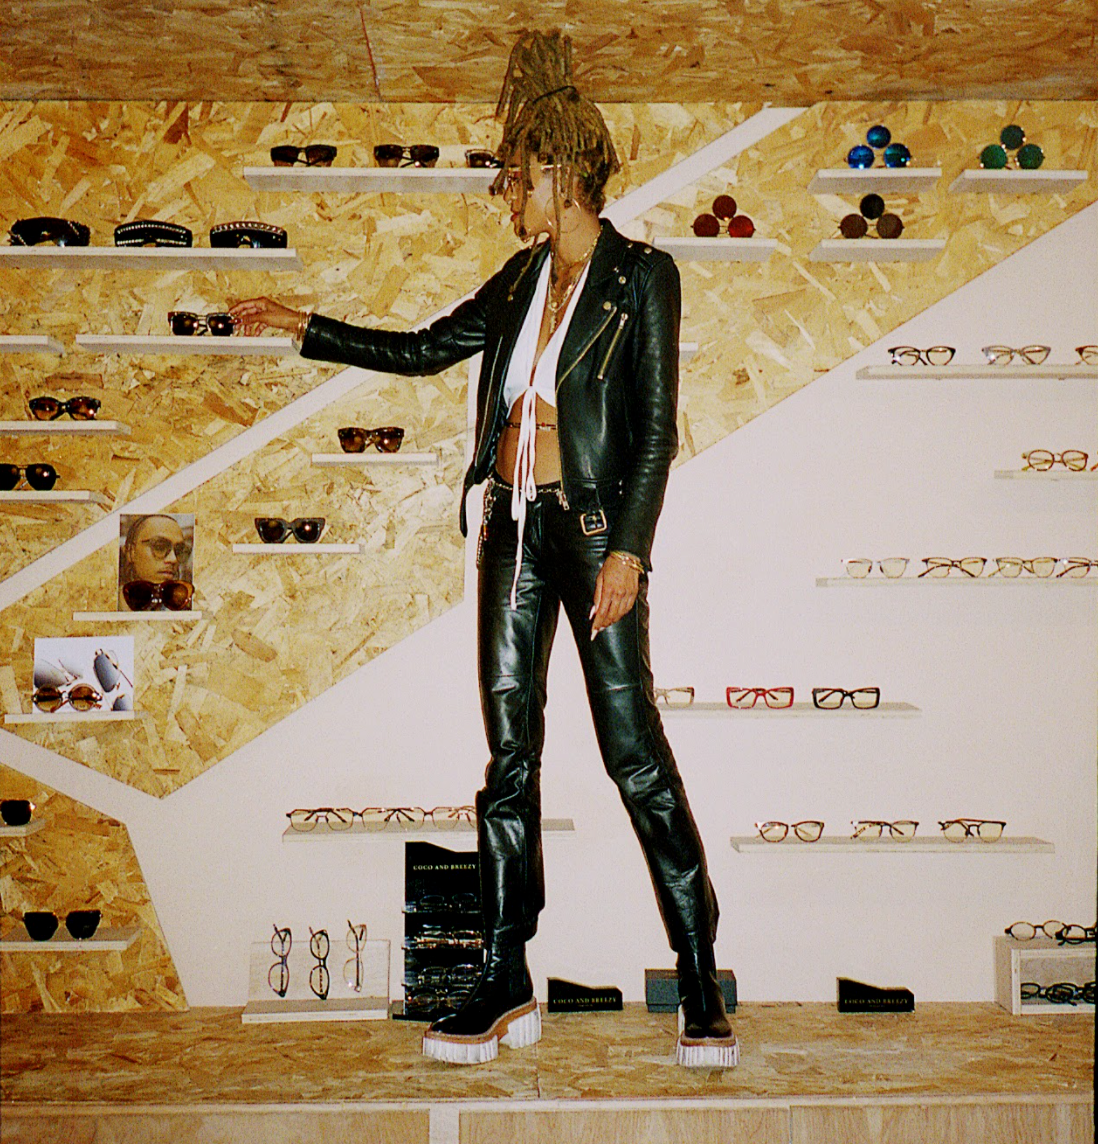 an image of the entrepreneur standing on the counter in front of a wall of sunglasses, placing a product on the shelf